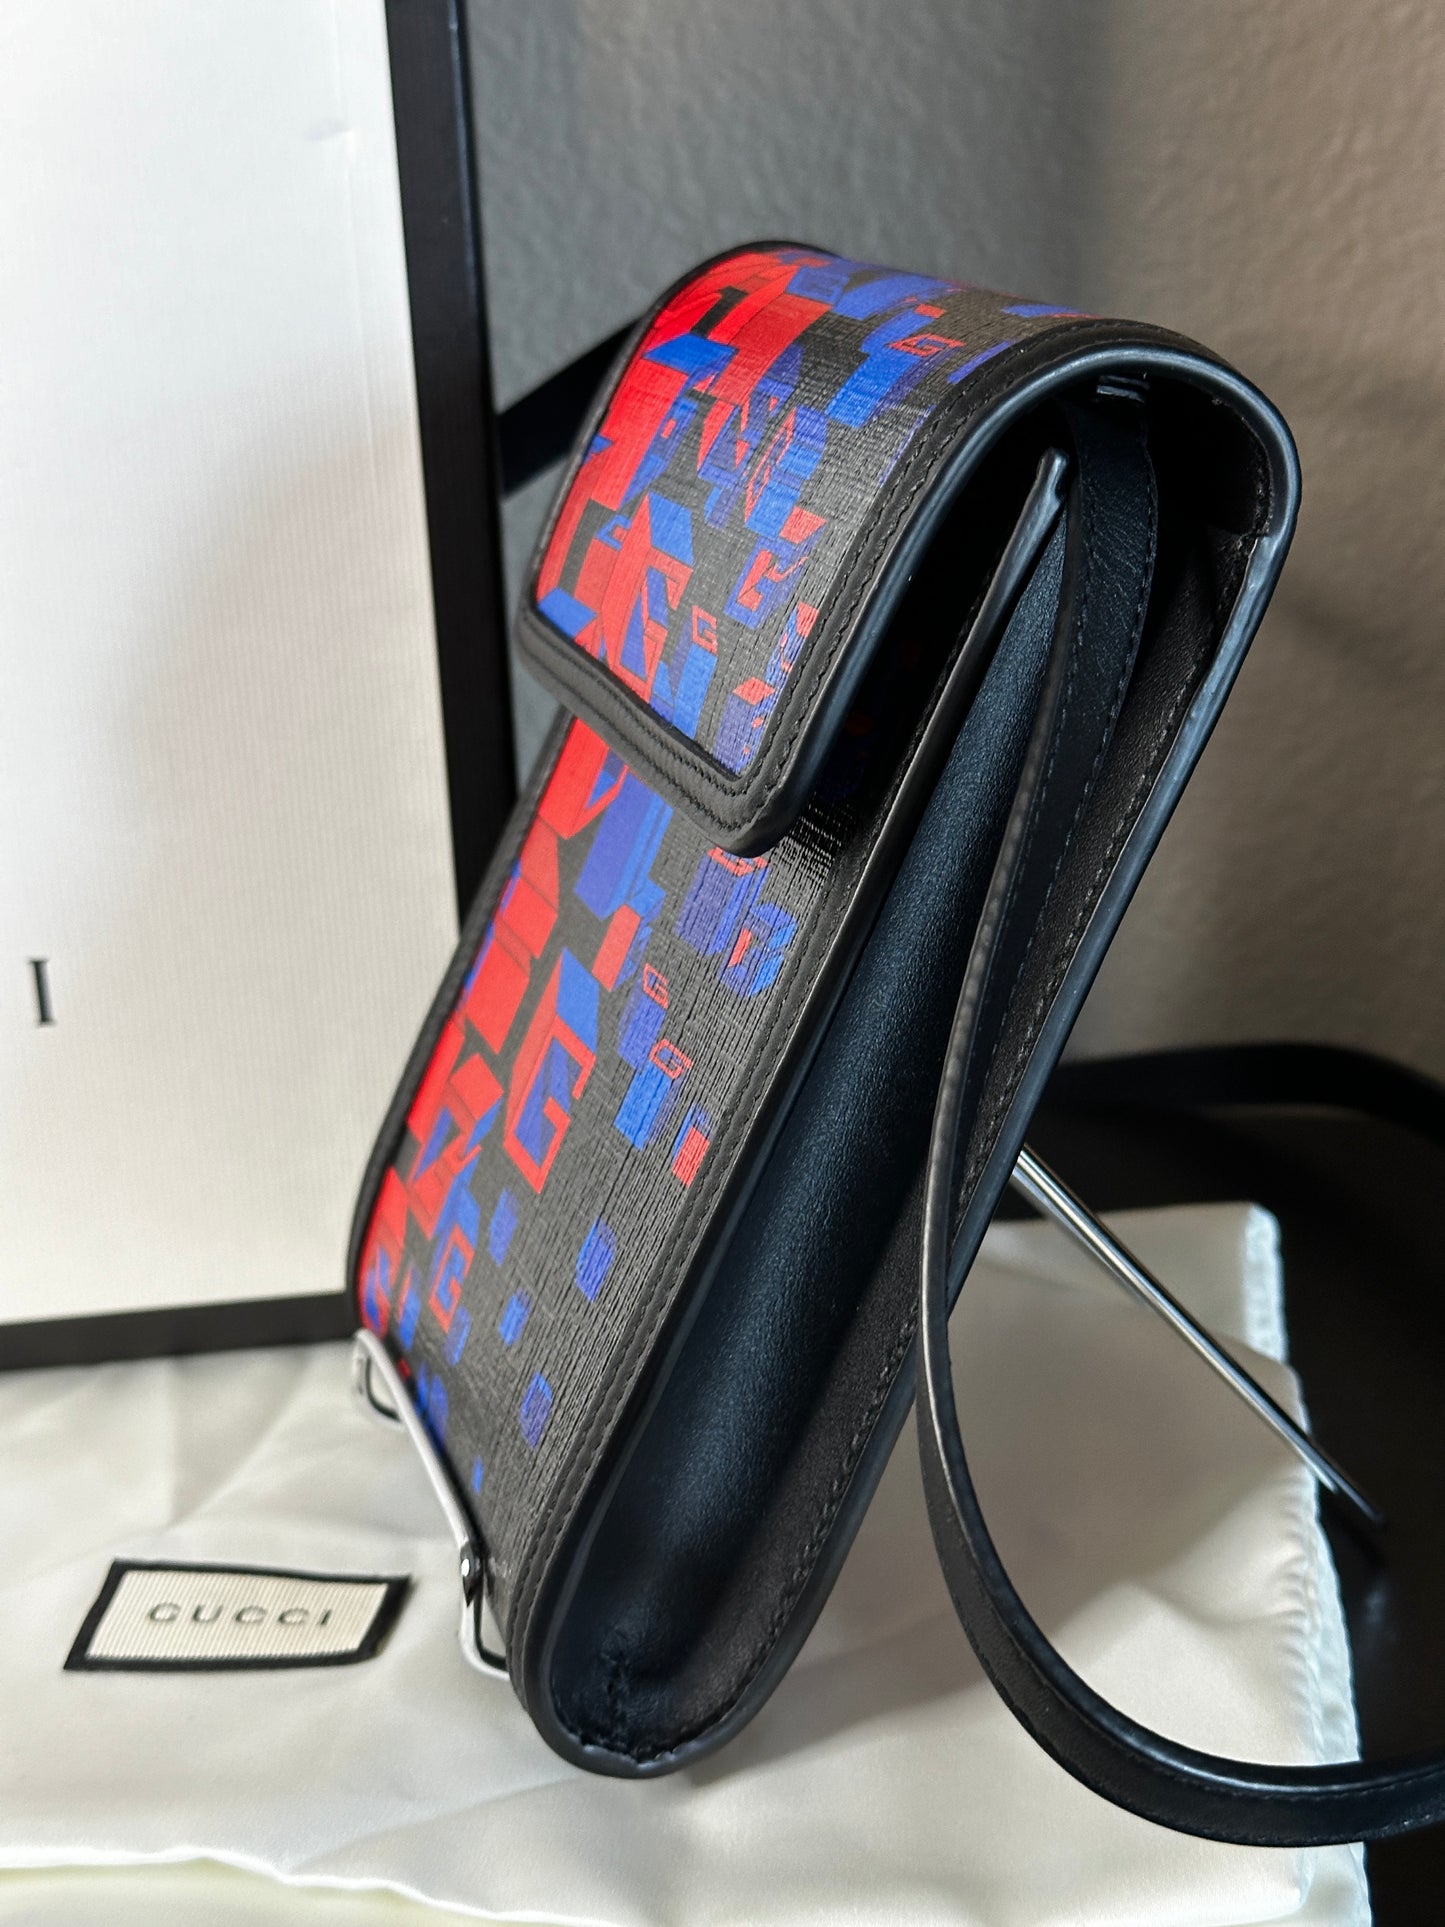 Authentic Guccig GG Printed Flap Crossbody